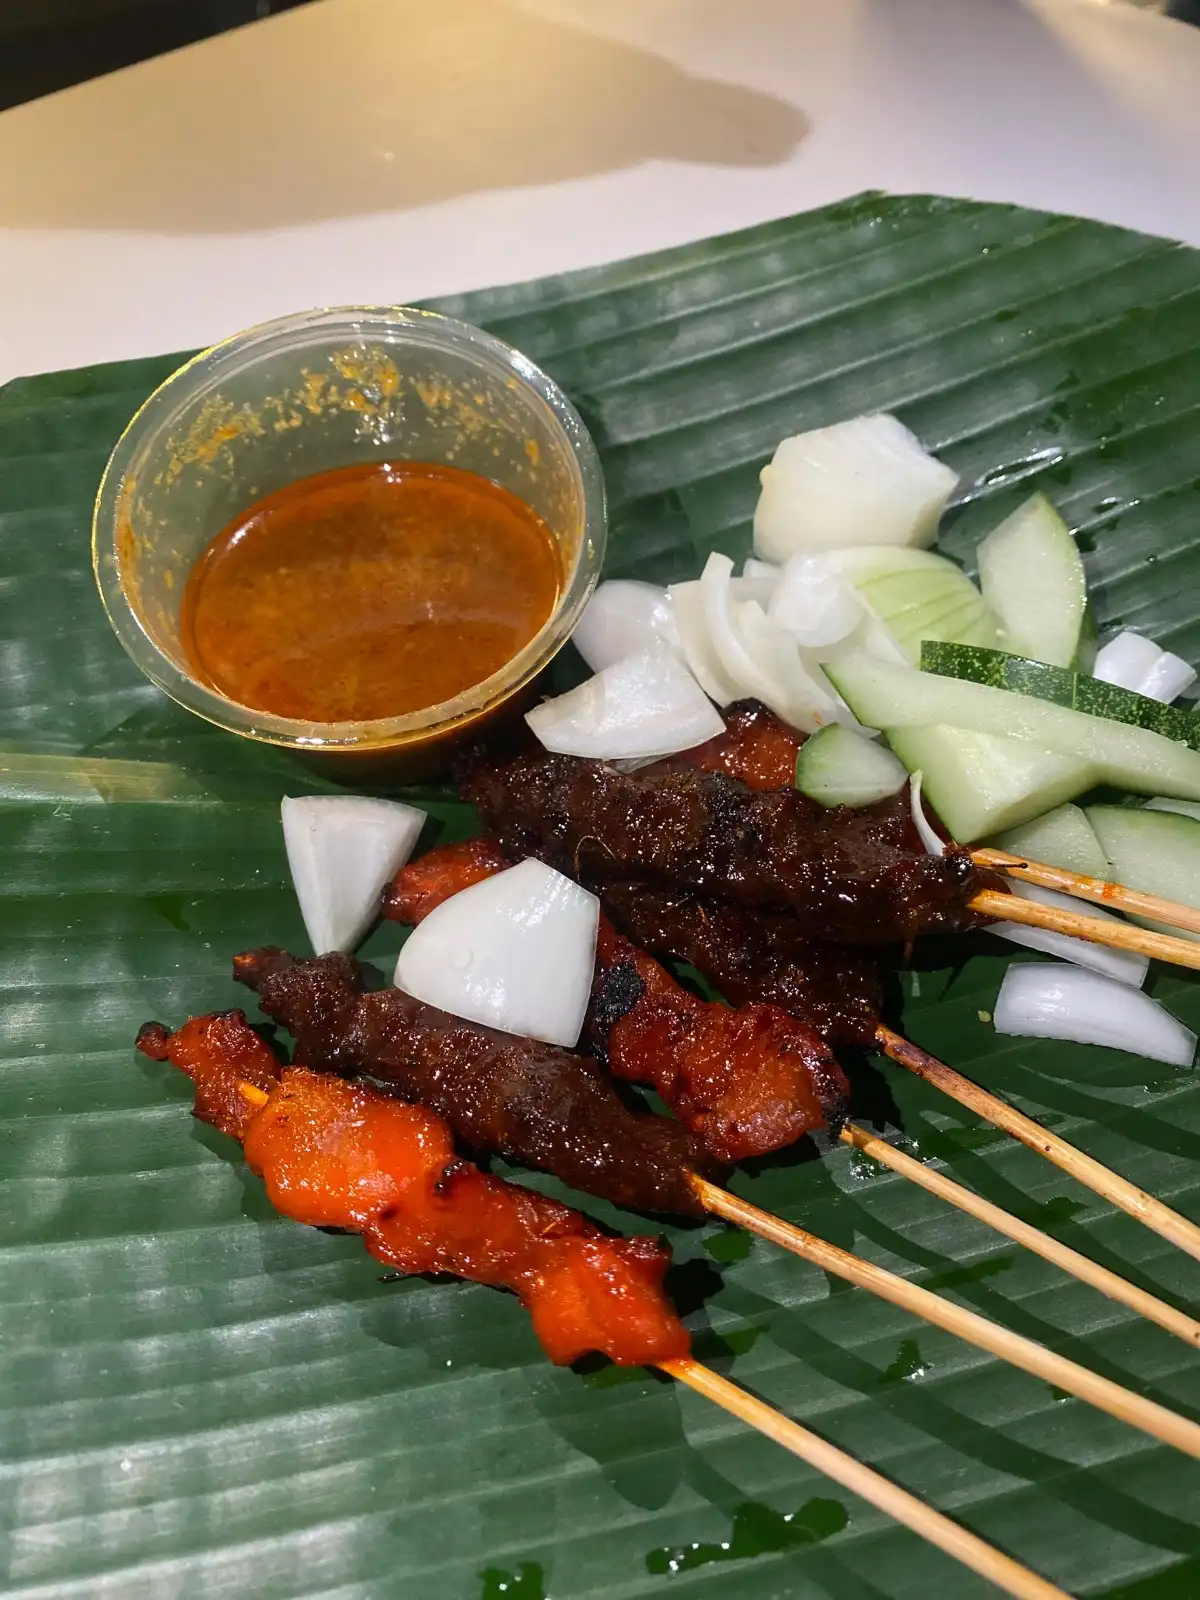 Grilled satay skewers with peanut sauce, cucumber, and onion slices on a banana leaf.